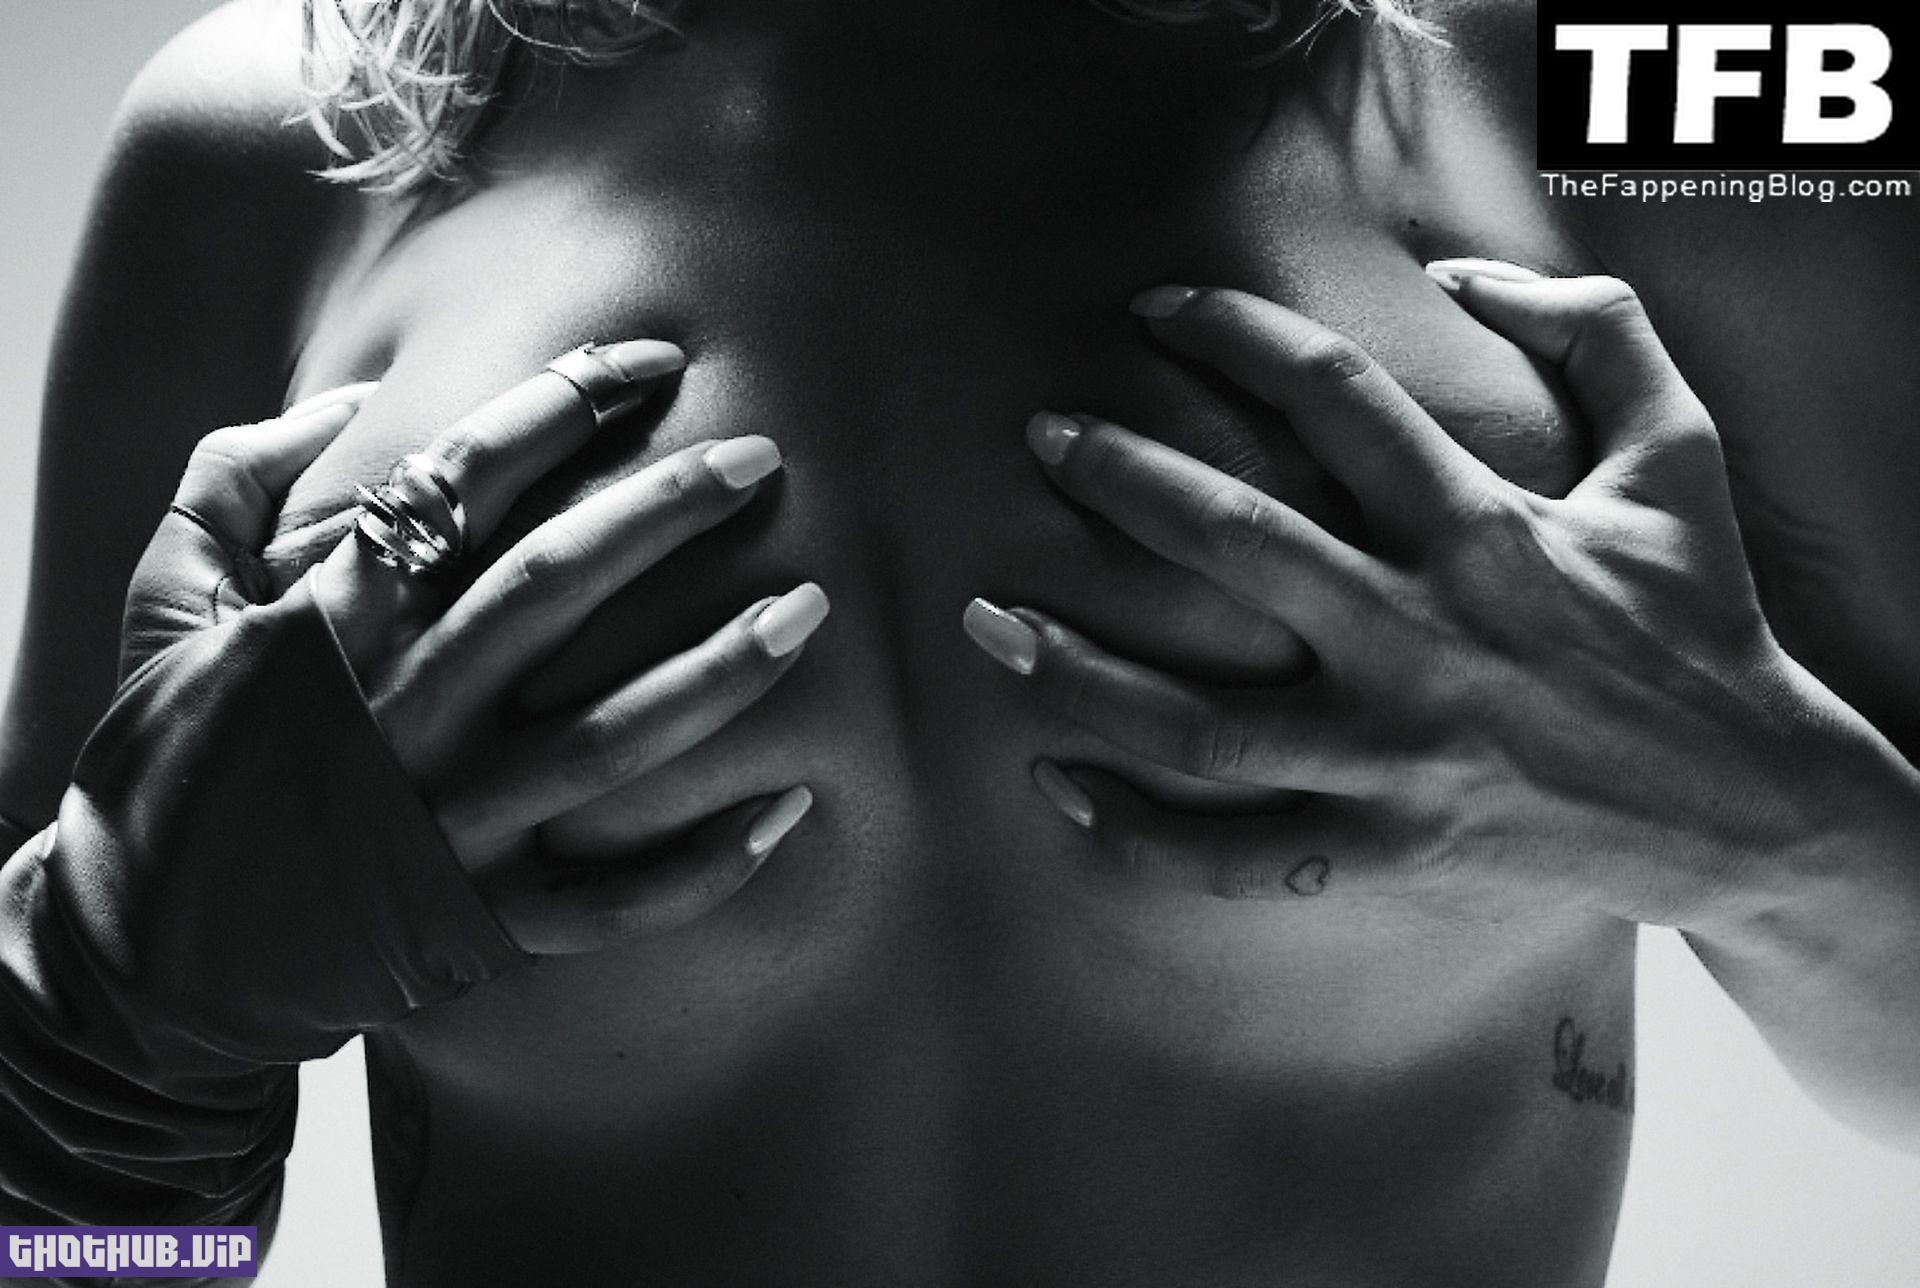 Rita Ora Nude Sexy Outtake Collection The Fappening Blog 10